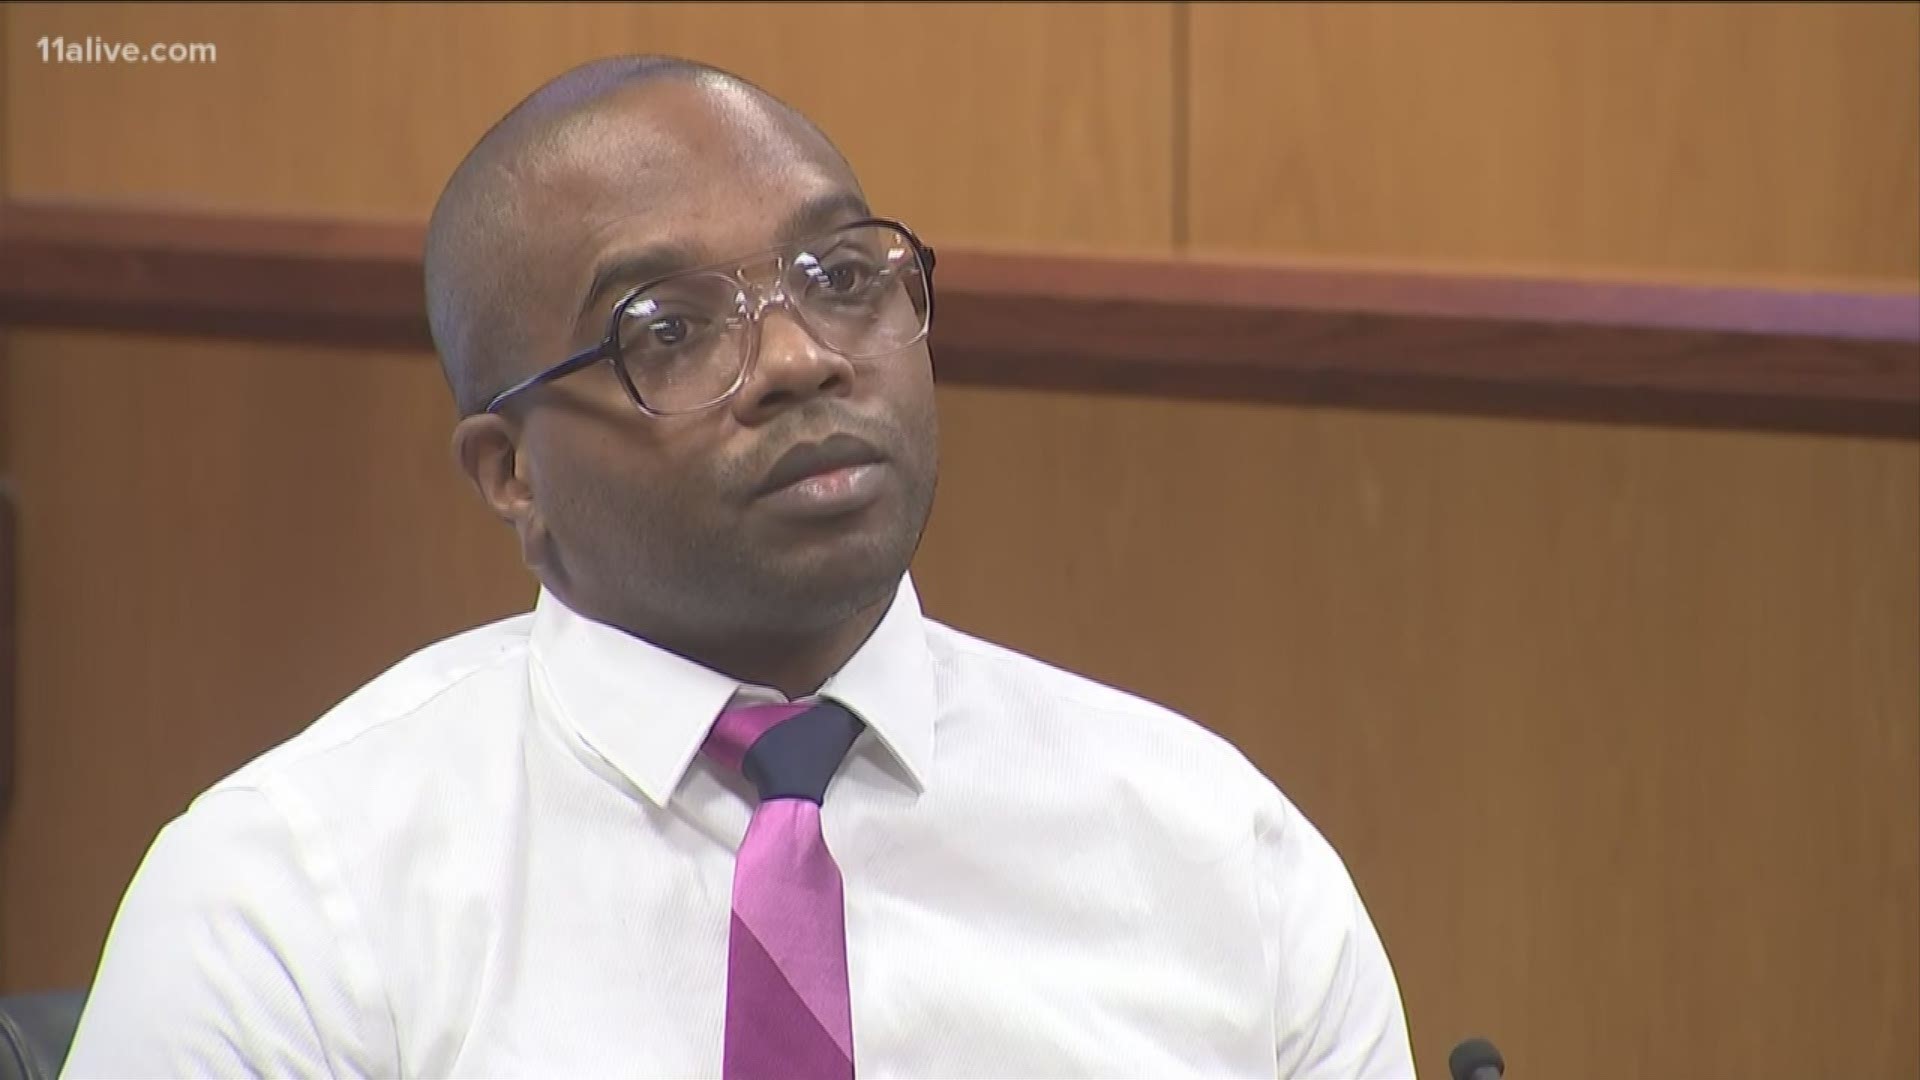 Robert Bivens, a former UberEATS driver, took the stand in his own murder trial and claimed he shot and killed a customer in Buckhead in self-defense.